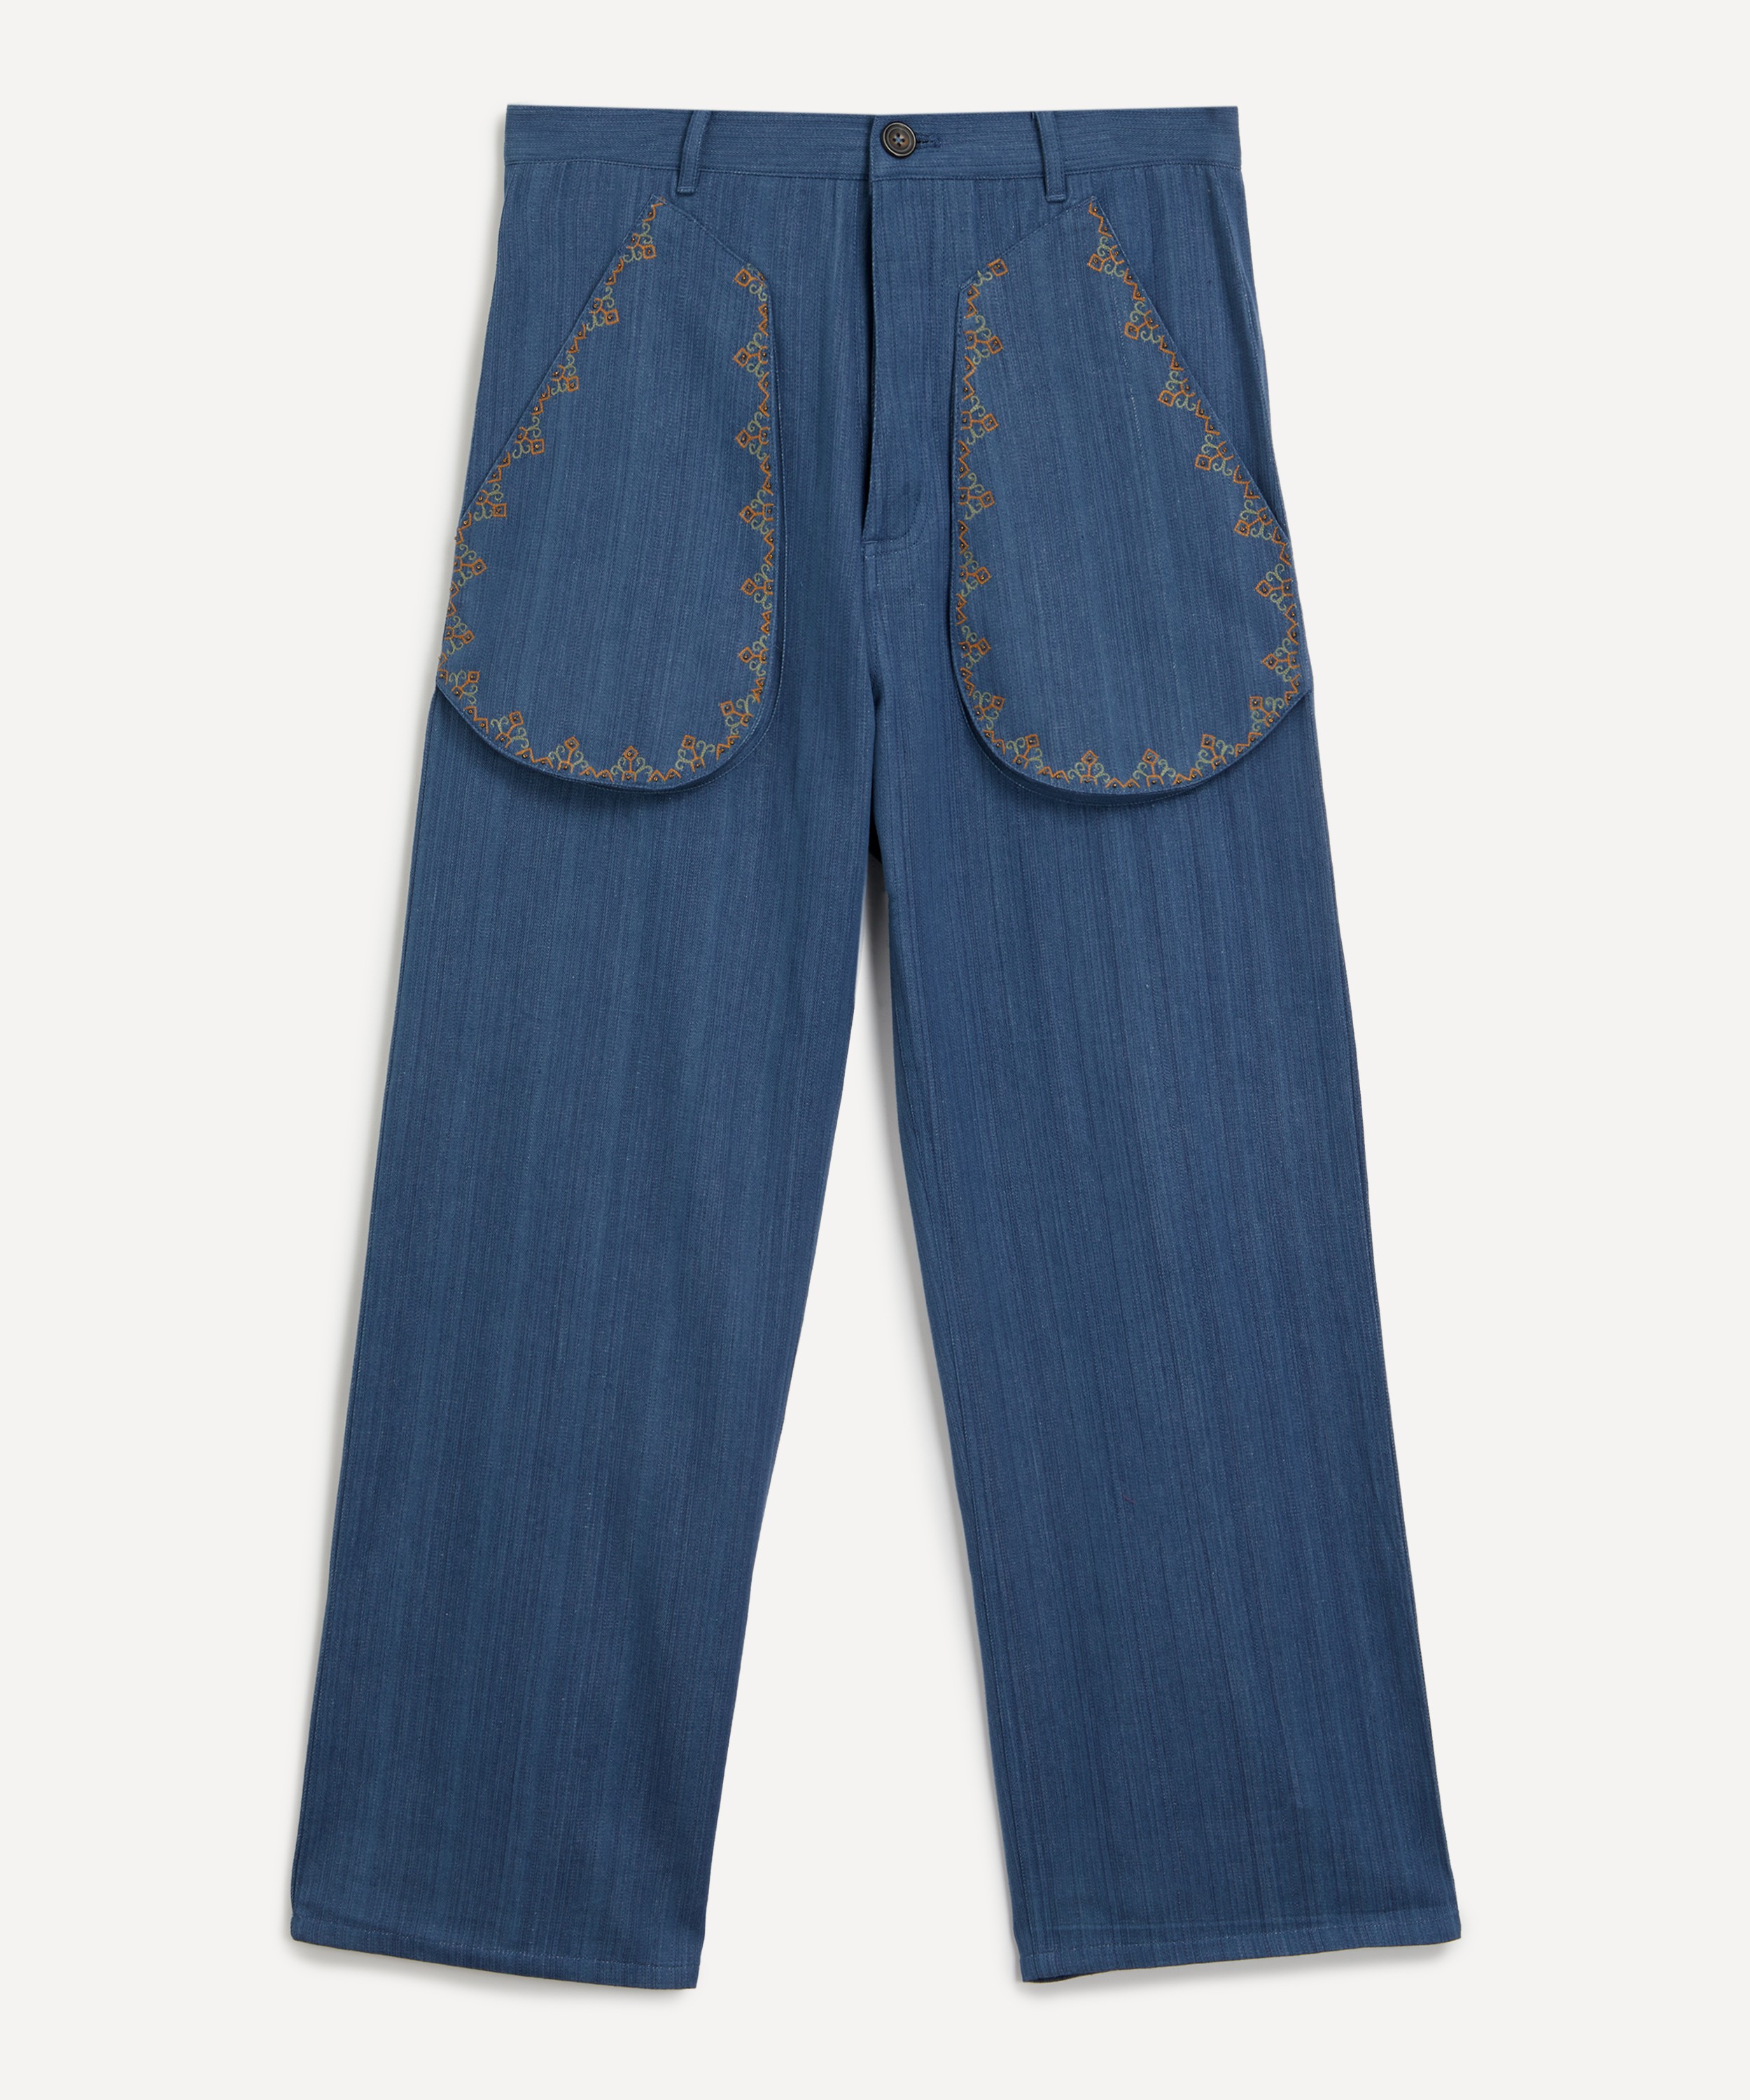 Kartik Research - Embroidered Cotton Cargo Trousers